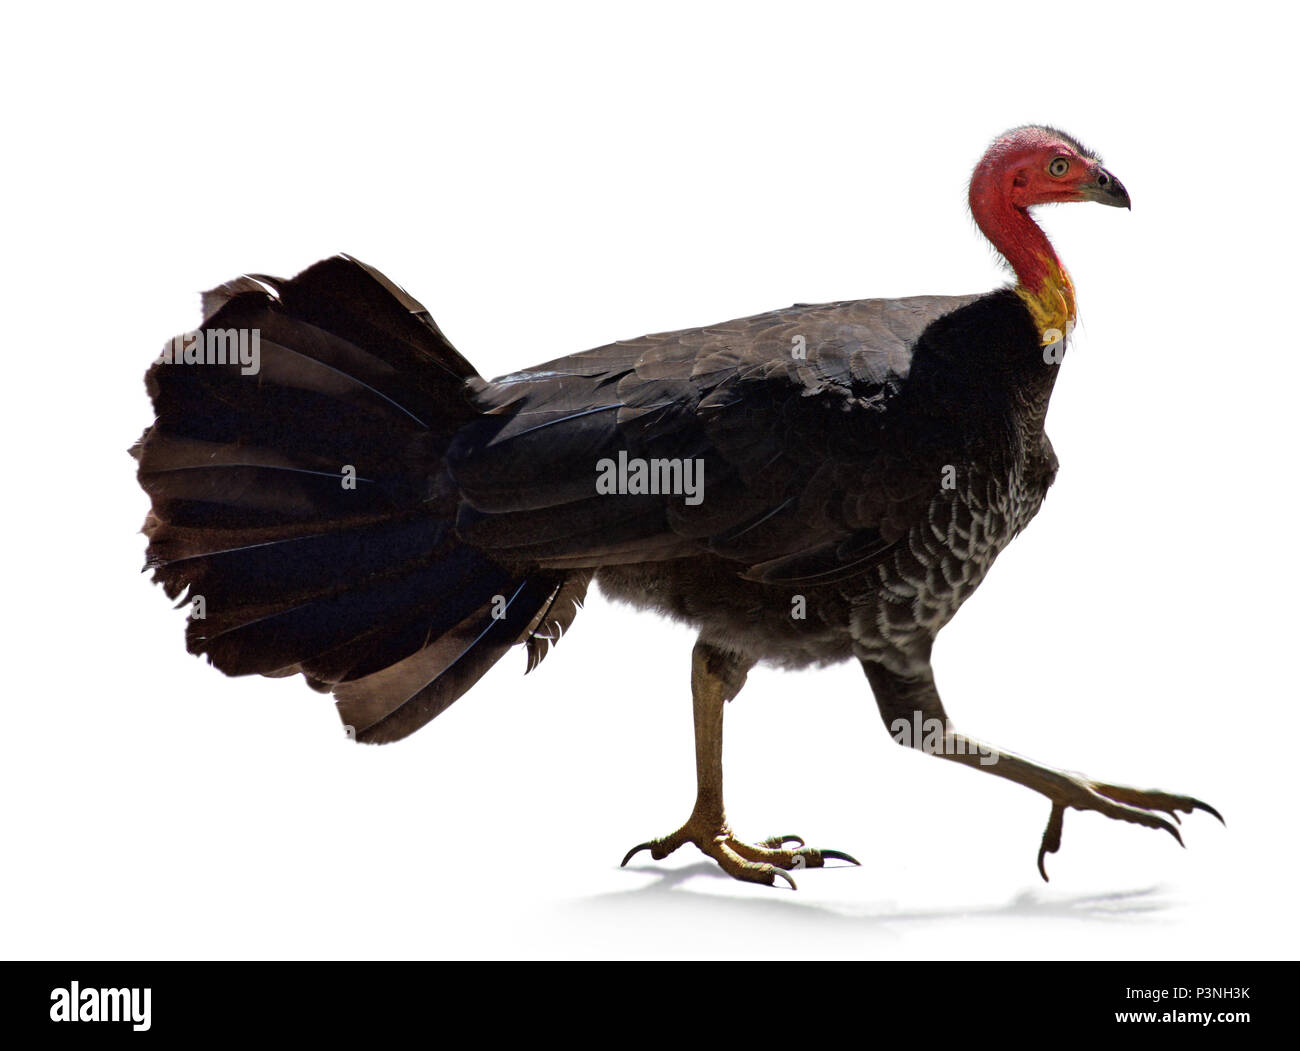 Deep etched Australian Brush Turkey walking with claws out on a flat surface with shadows. Stock Photo